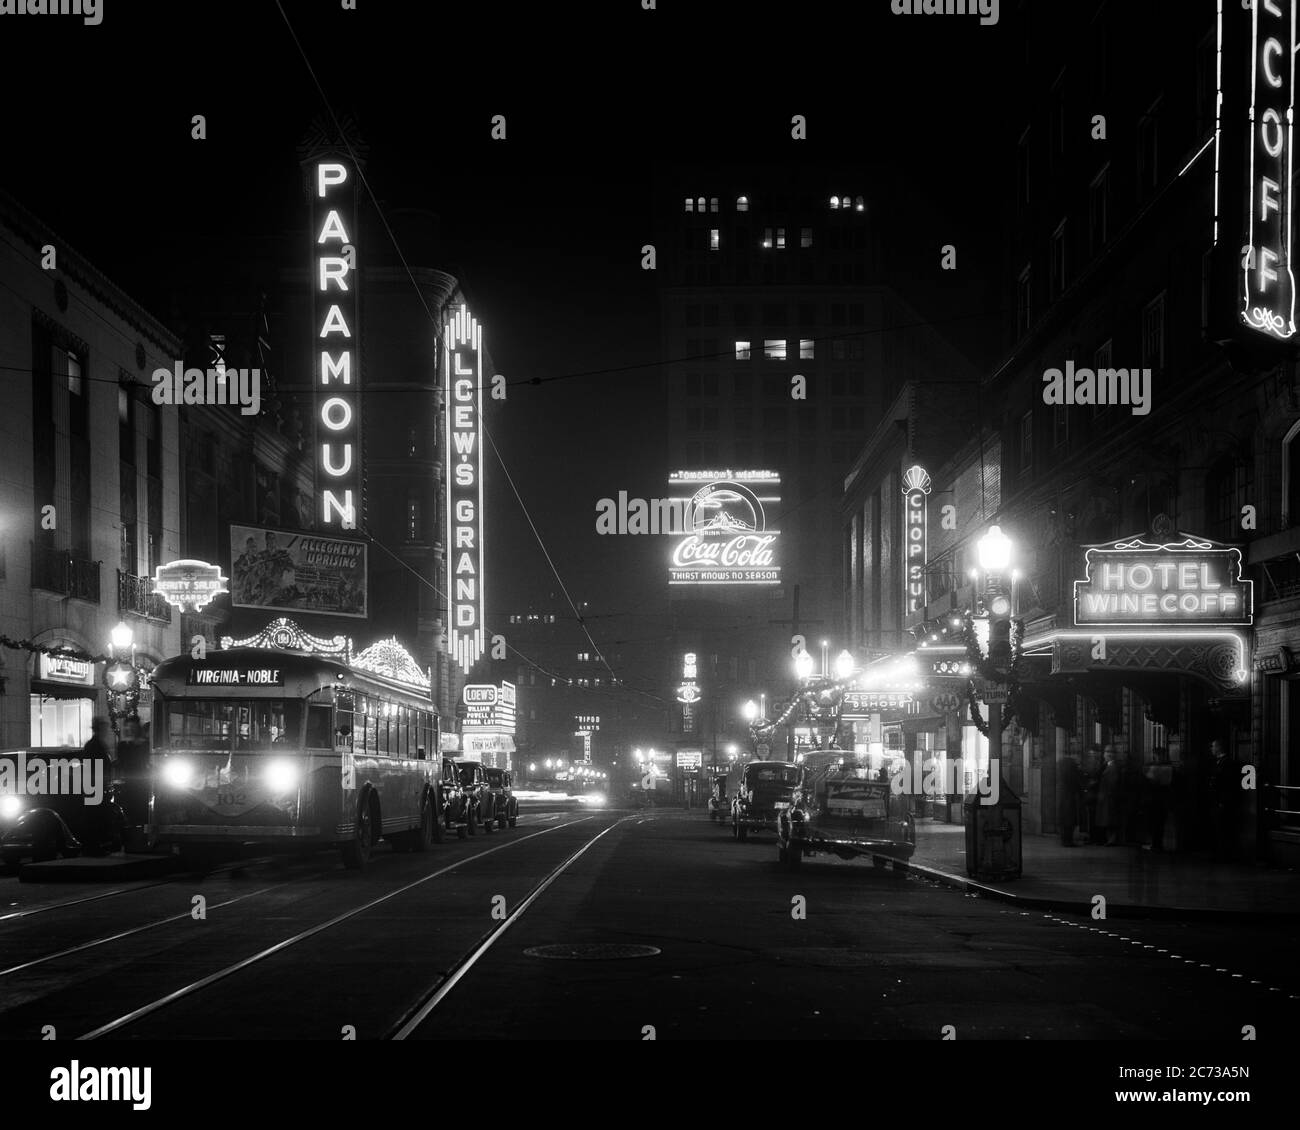 1930S 1940s DOWNTOWN AT NIGHT CAR BUS TRAFFIC NEON SIGNS INCLUDES COCA-COLA PEACHTREE STREET MOVIE THEATERS ATLANTA GEORGIA USA - r13012 PUN001 HARS NEON AUTOS EXCITEMENT EXTERIOR RECREATION AT COCA-COLA SOUTHERN CONCEPTUAL AUTOMOBILES STYLISH VEHICLES INCLUDES NIGHTLIFE BLACK AND WHITE GA OLD FASHIONED Stock Photo